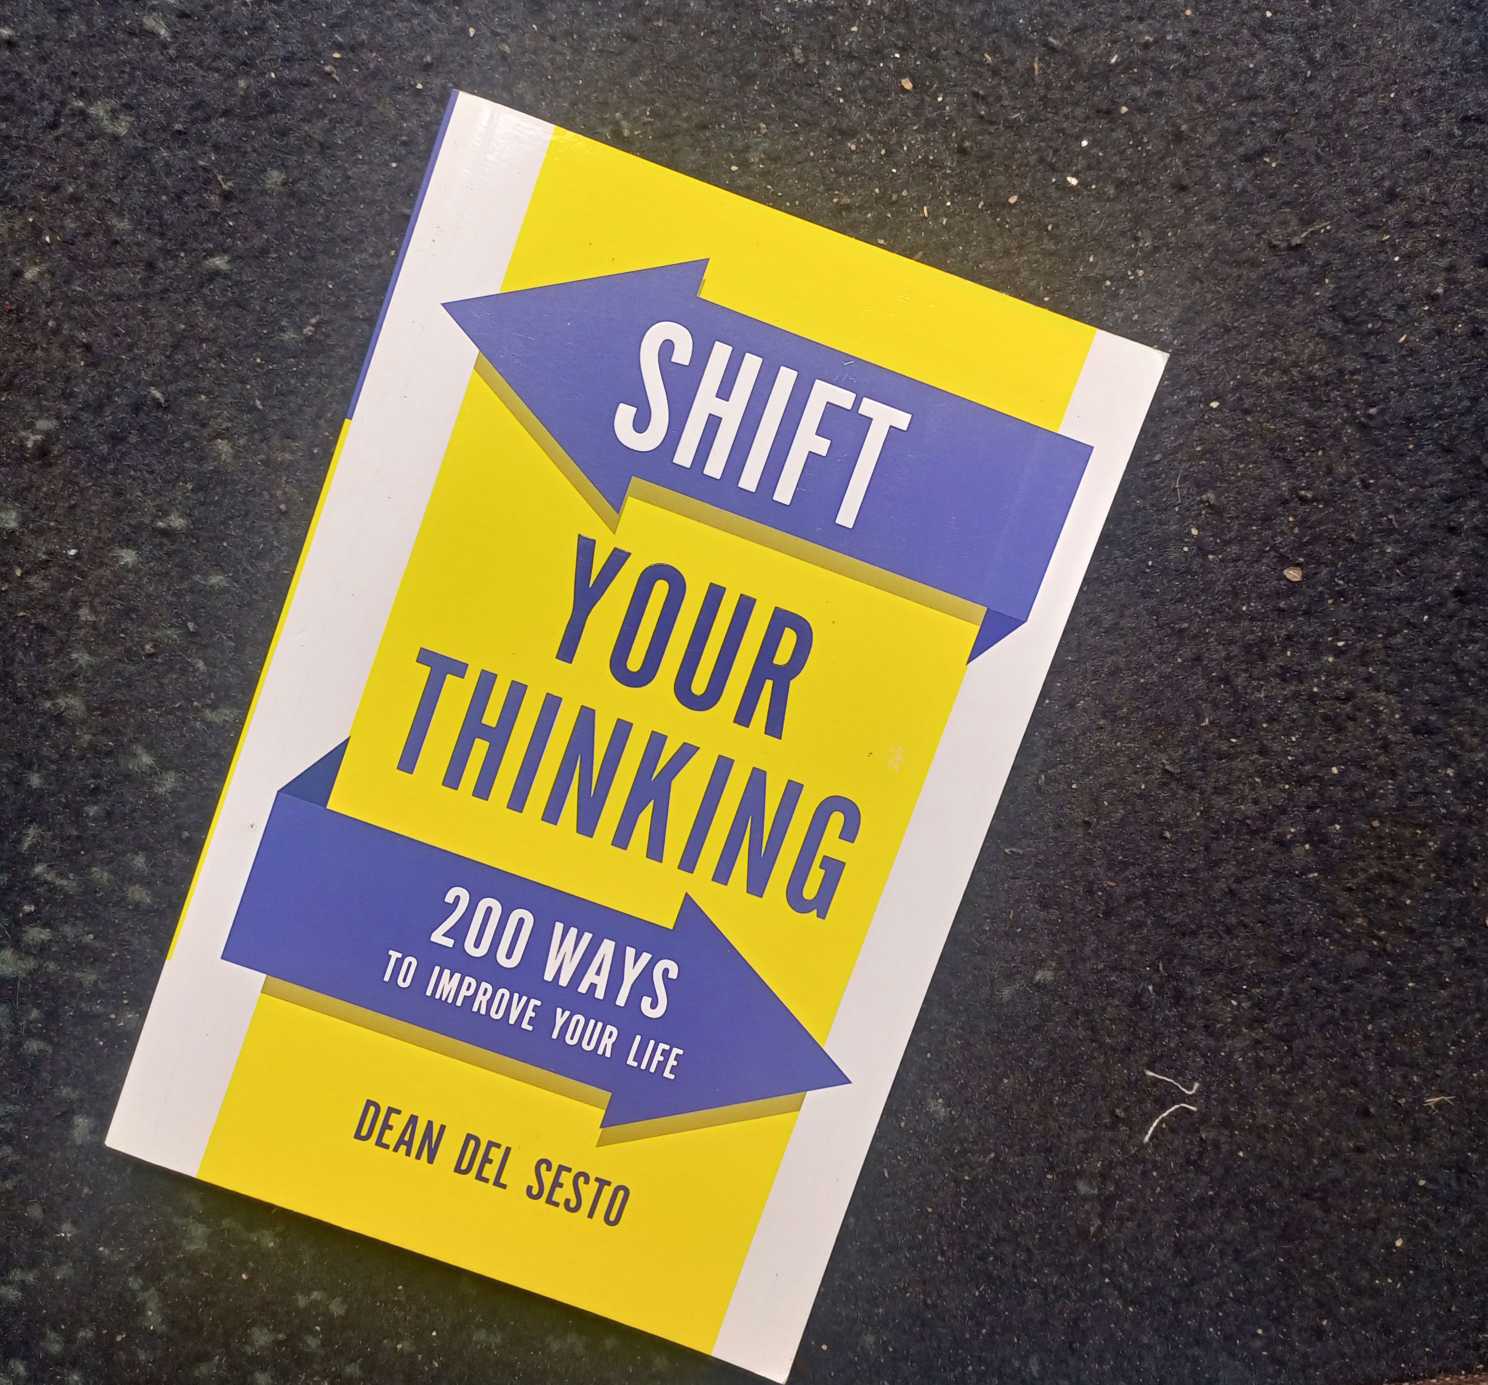 Shift Your Thinking: